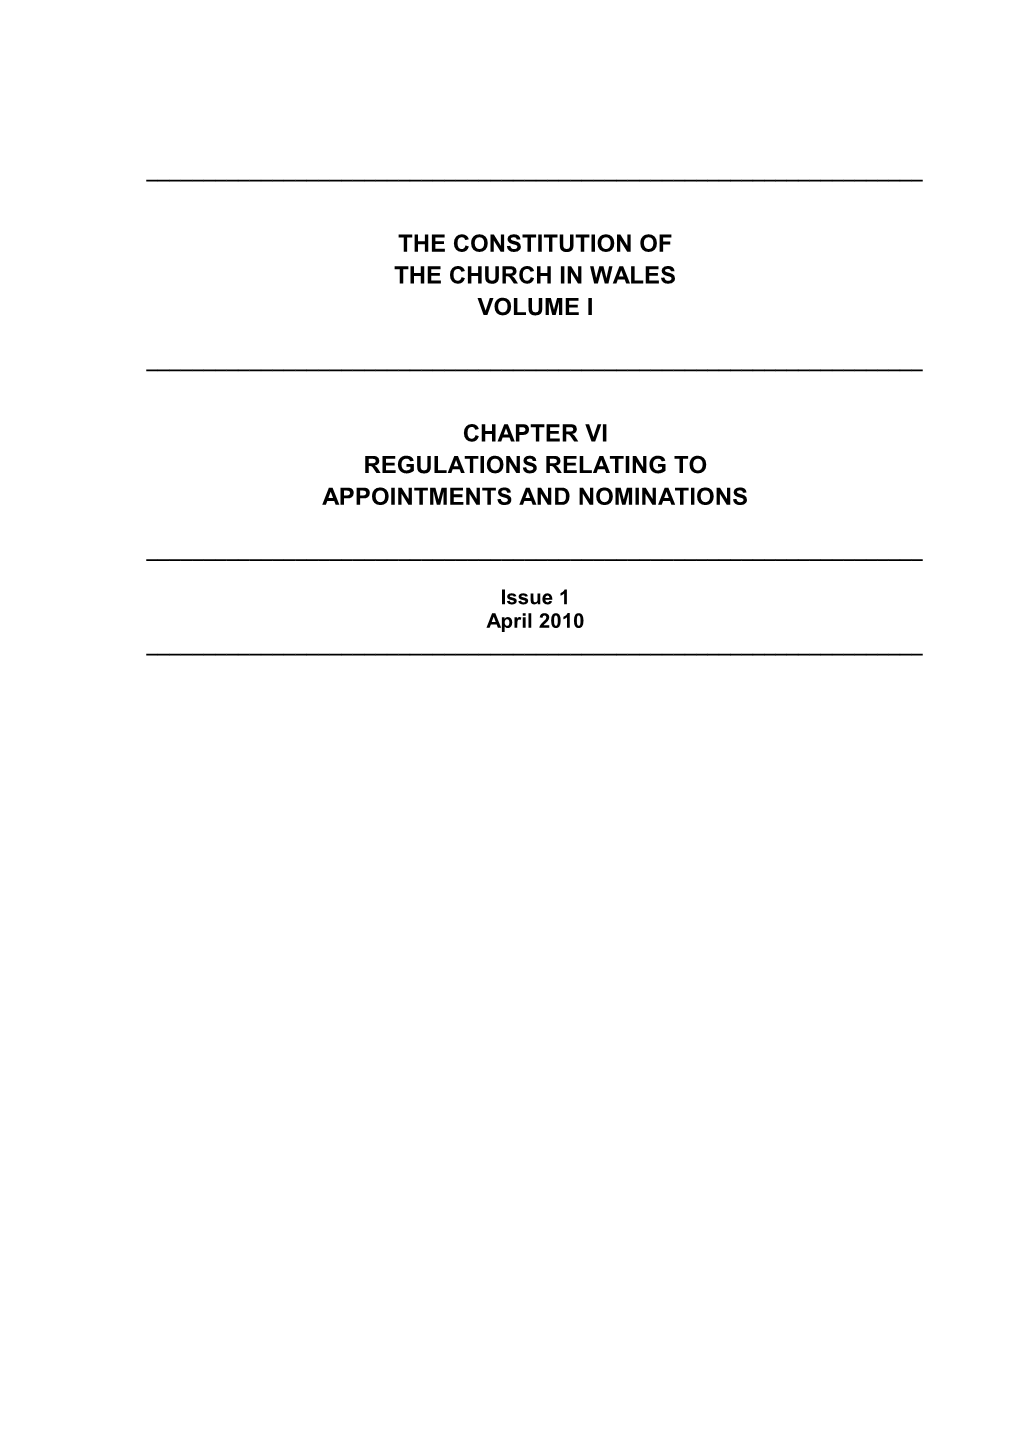 Chapter VI - Regulations Relating to Appointments and Nominations